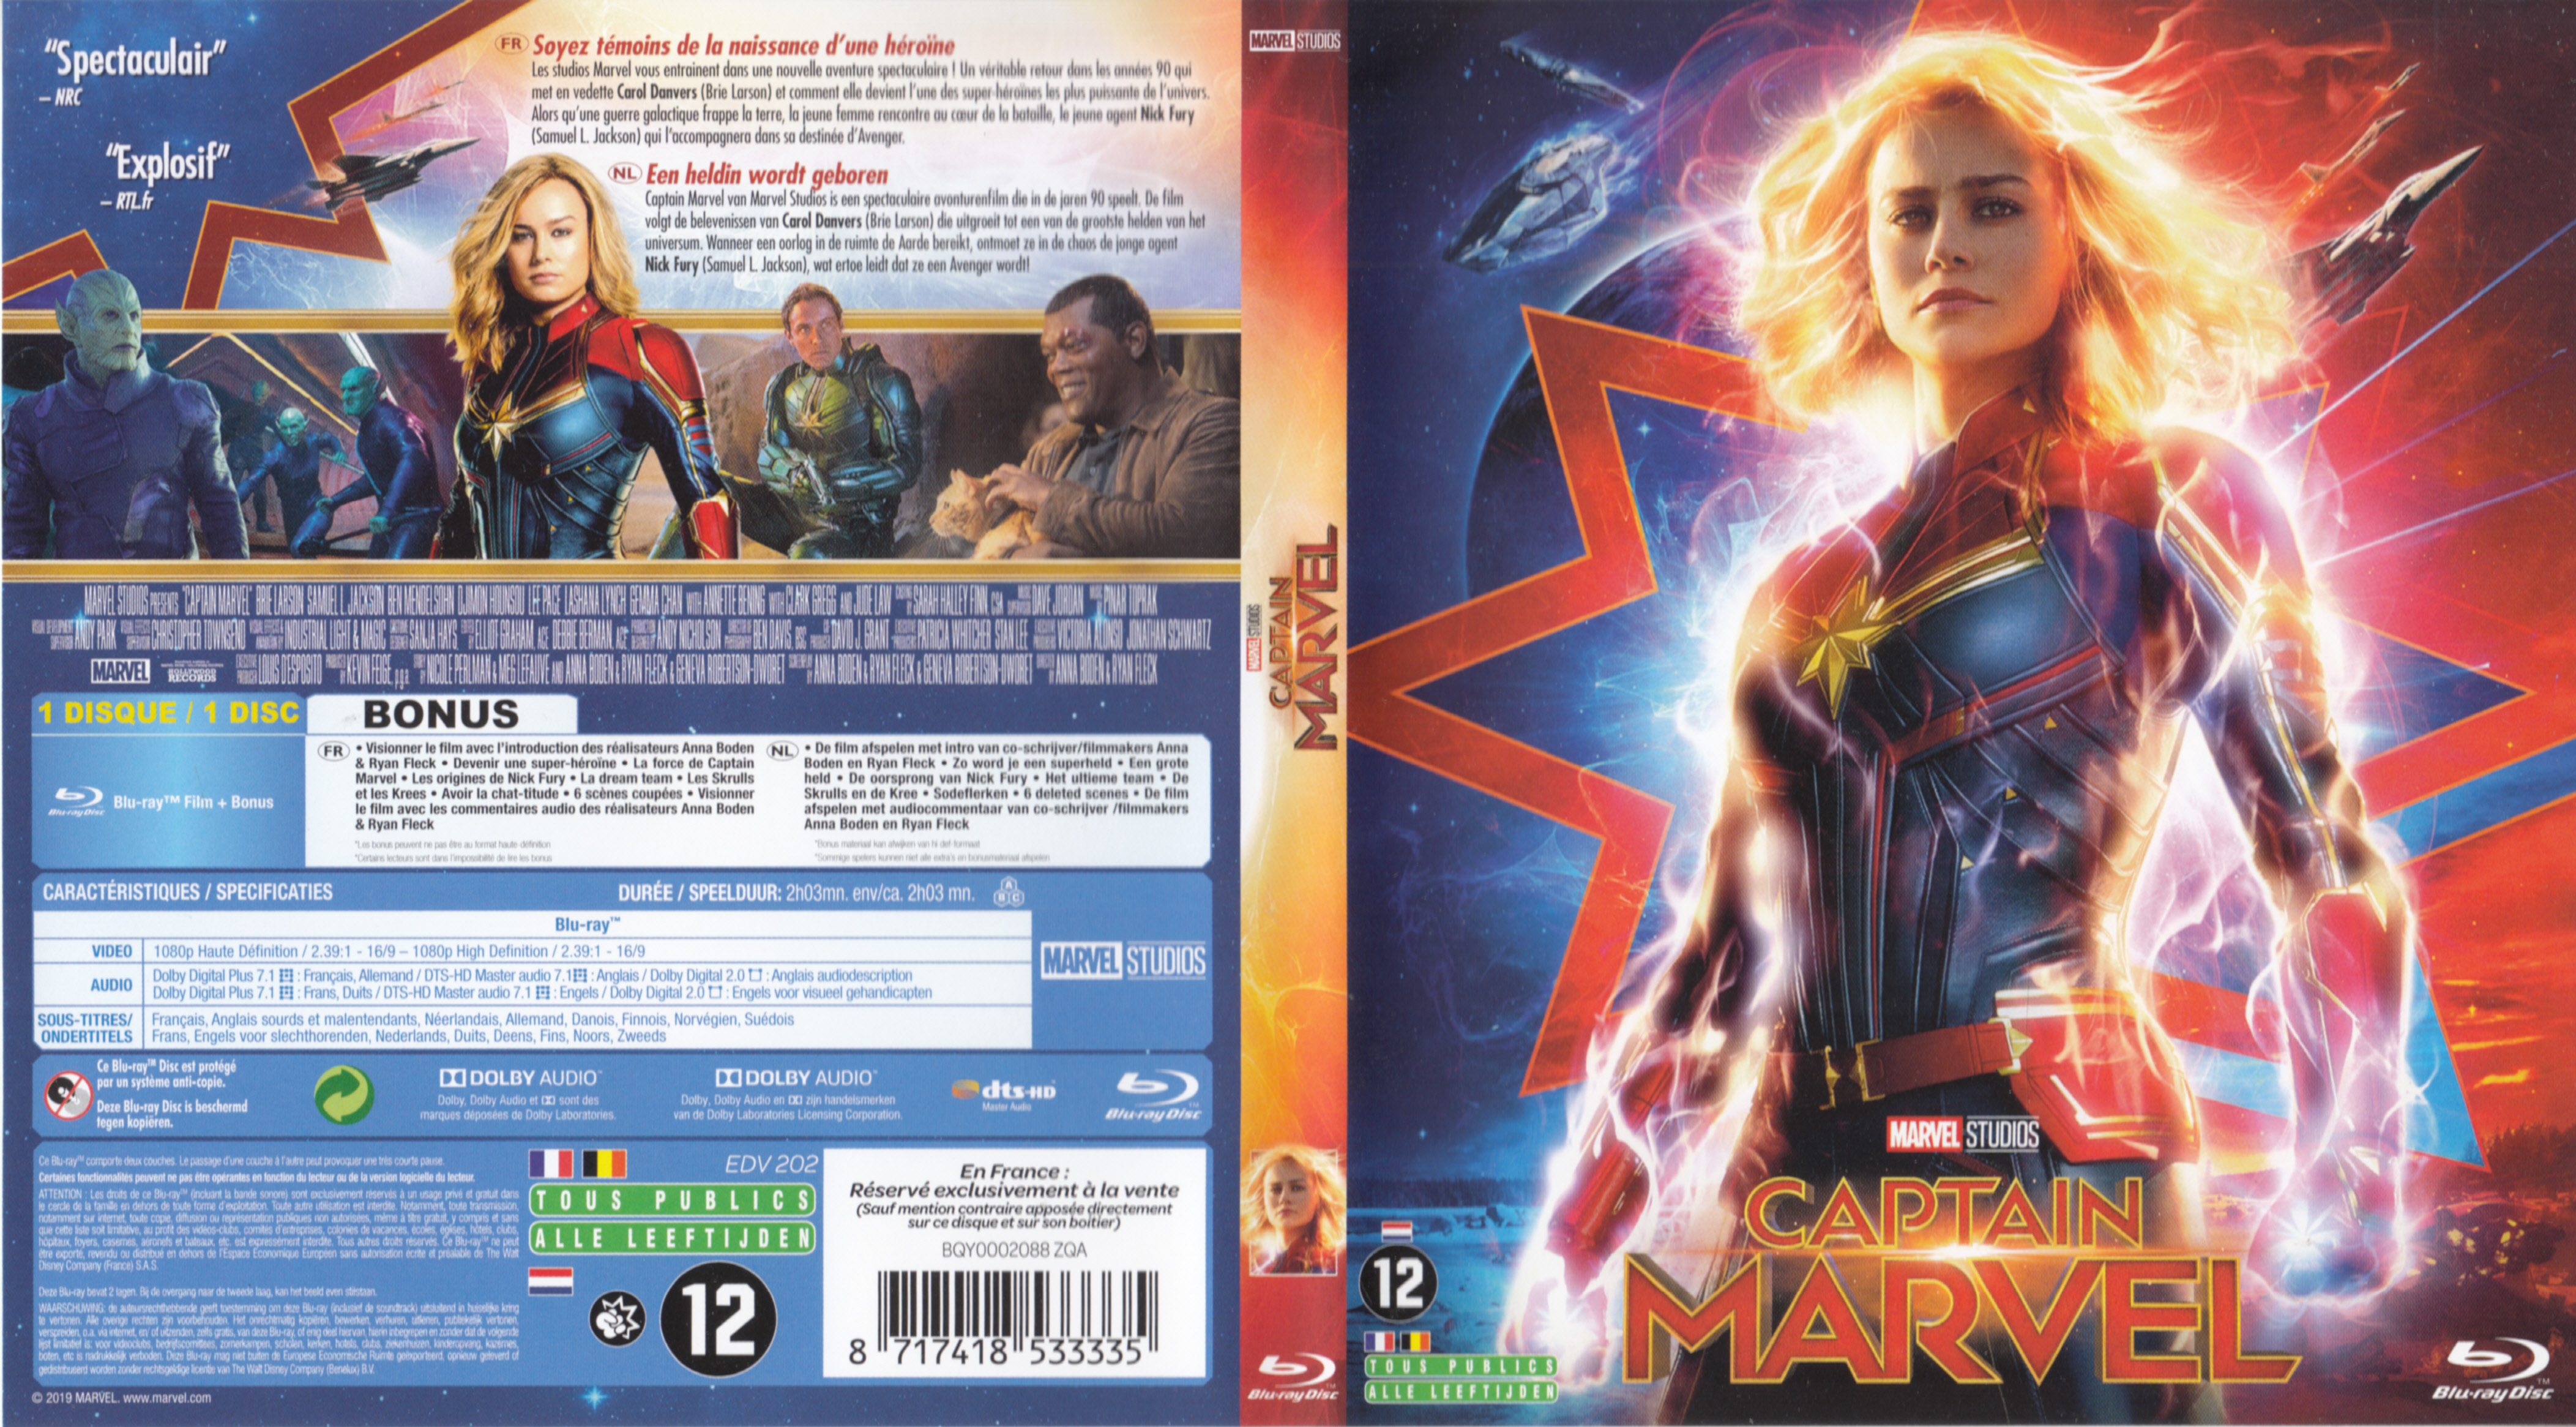 Jaquette DVD Captain marvel (BLU-RAY)